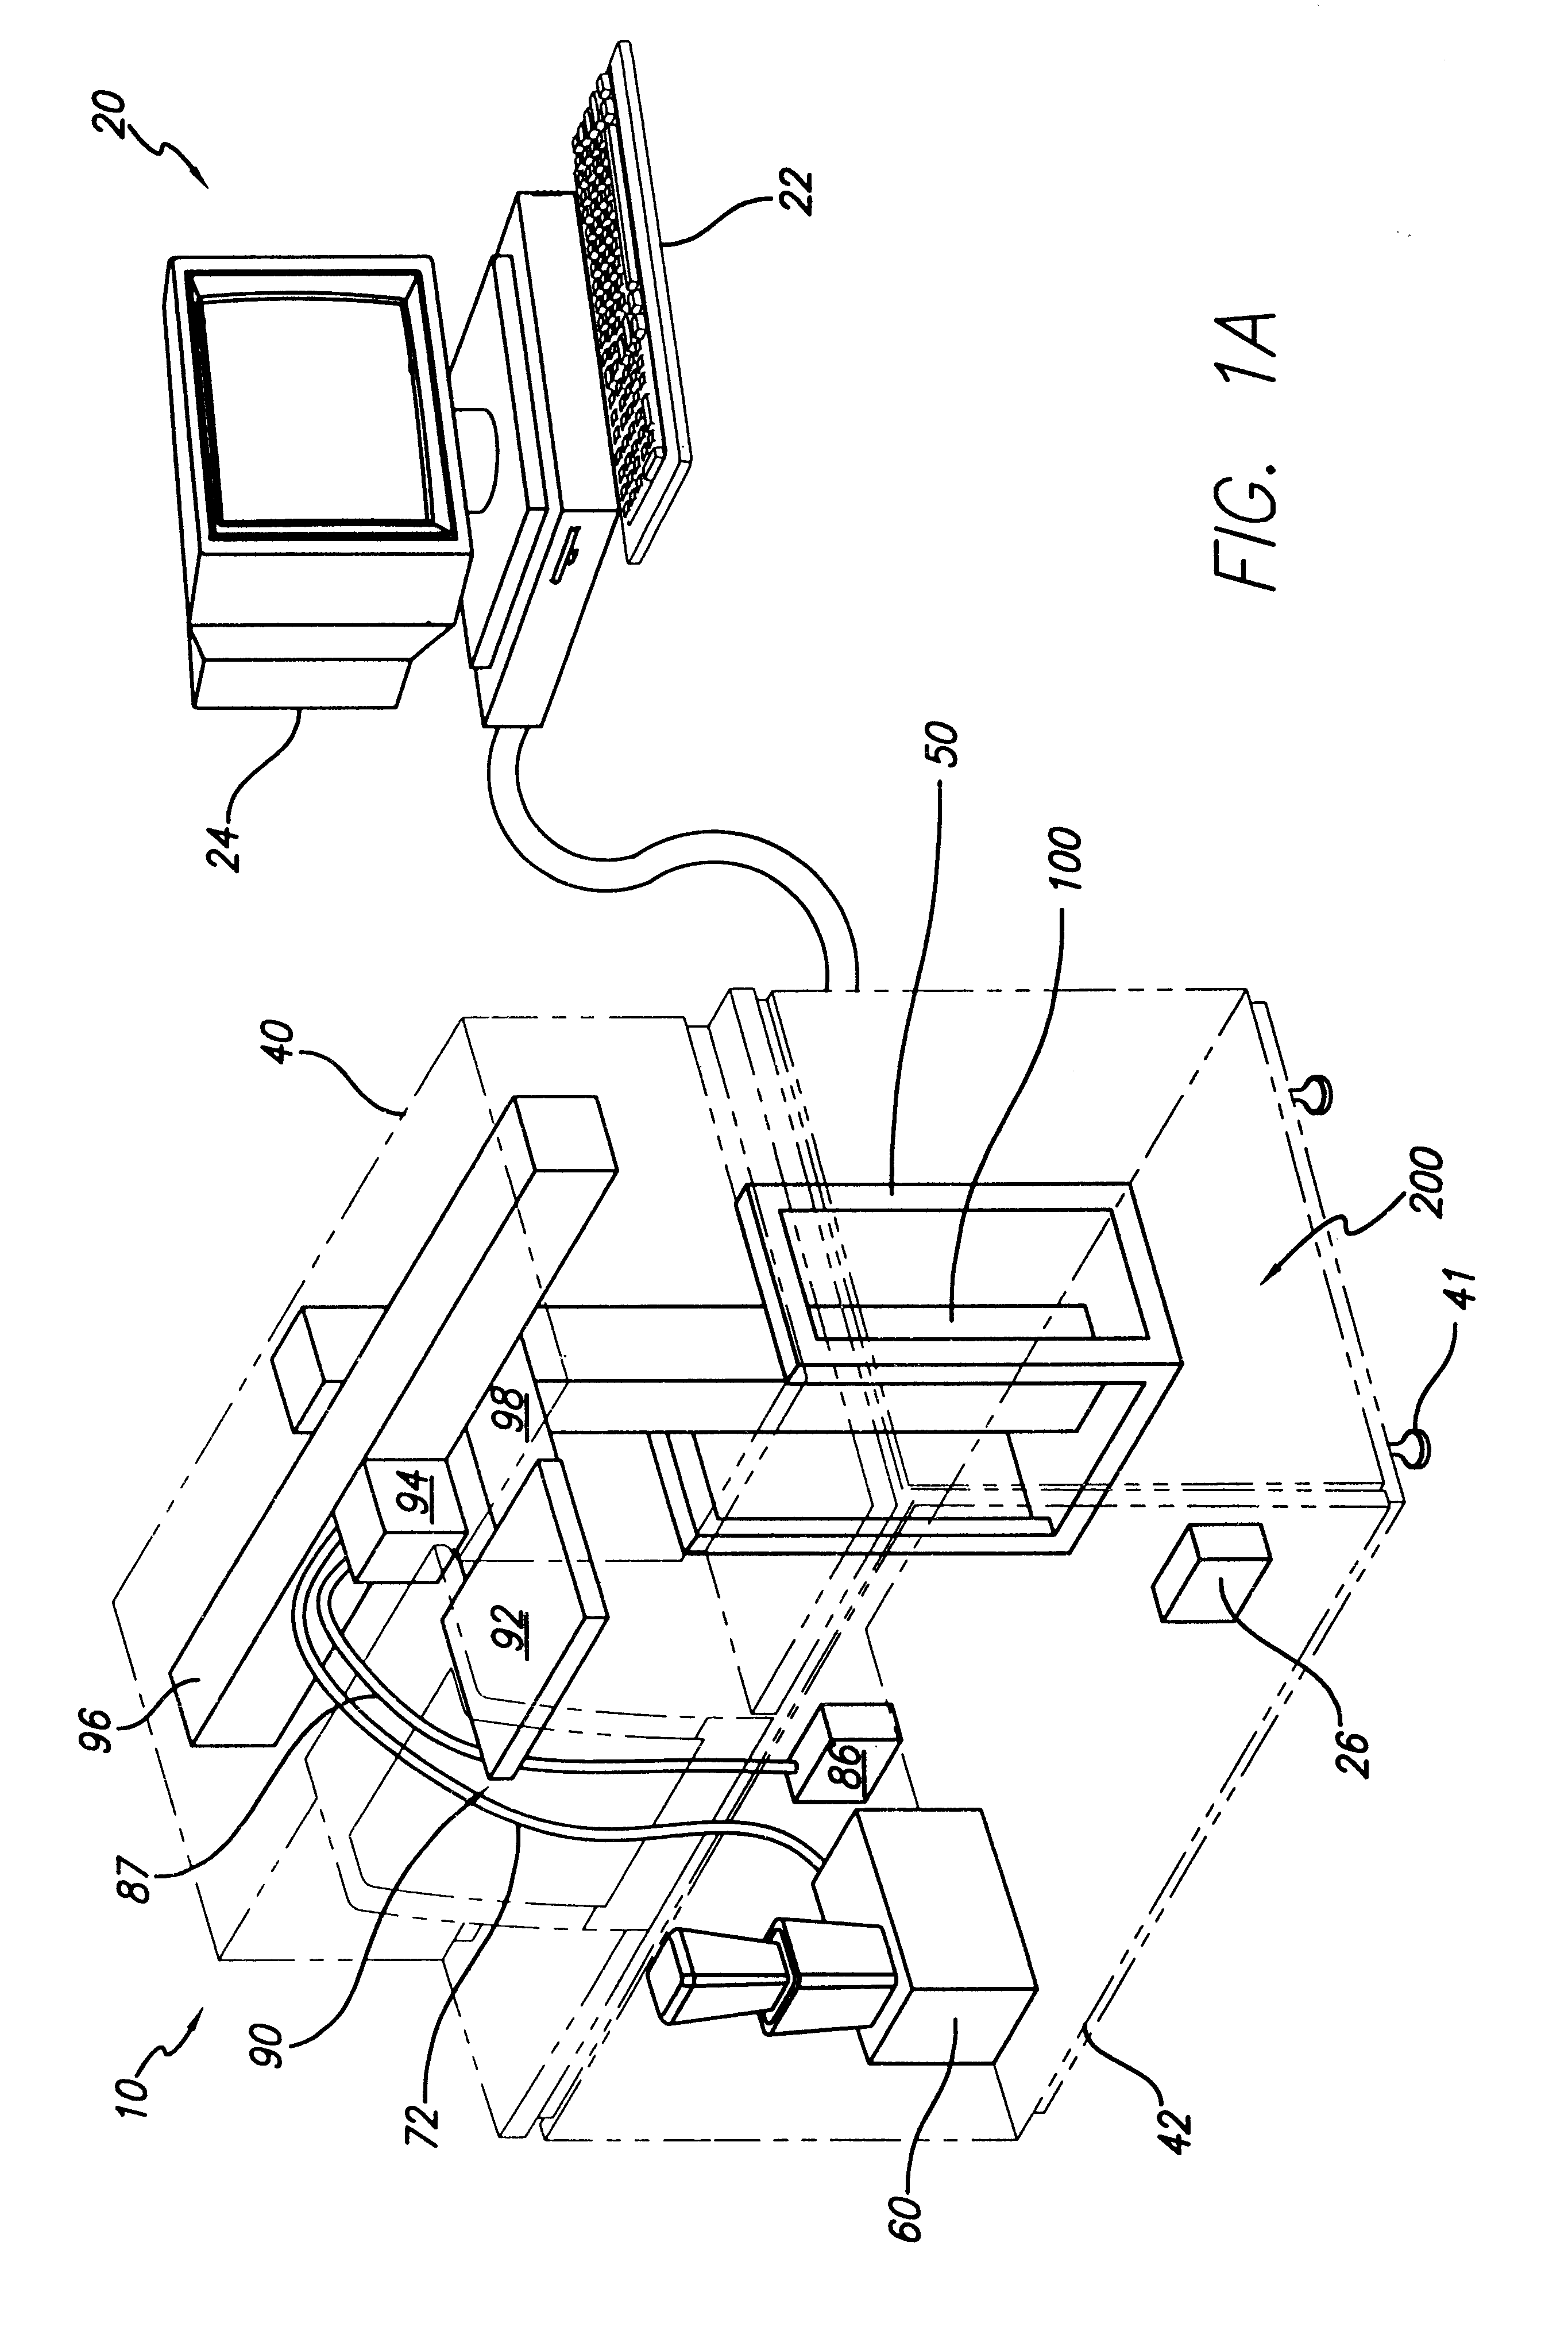 Selective deposition modeling system and method